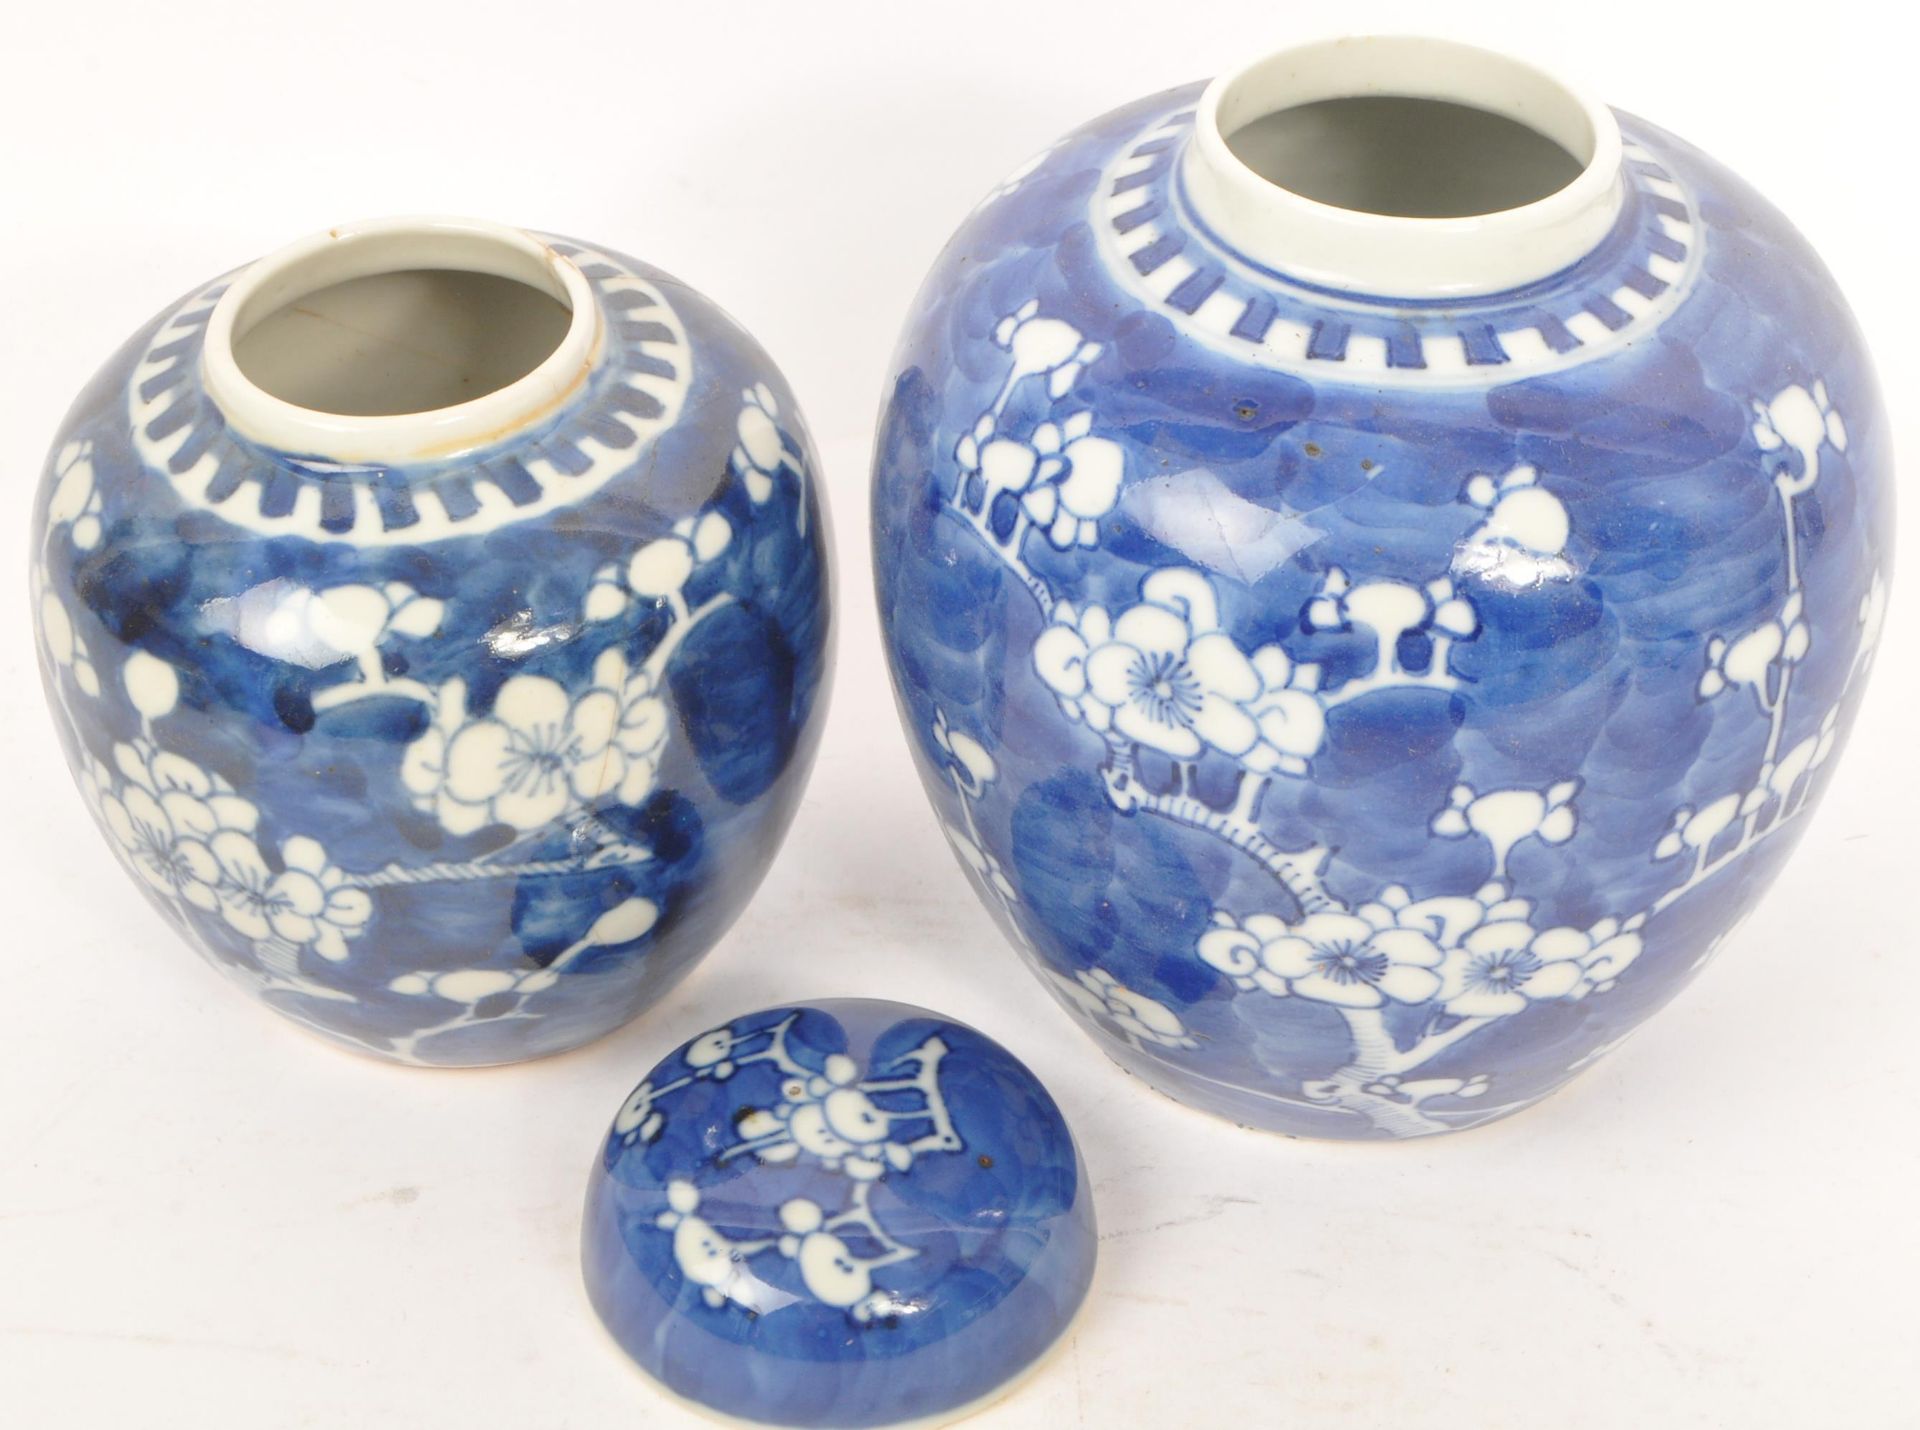 COLLECTION OF 19TH CENTURY CHINESE PORCELAIN GINGER JARS - Image 3 of 8